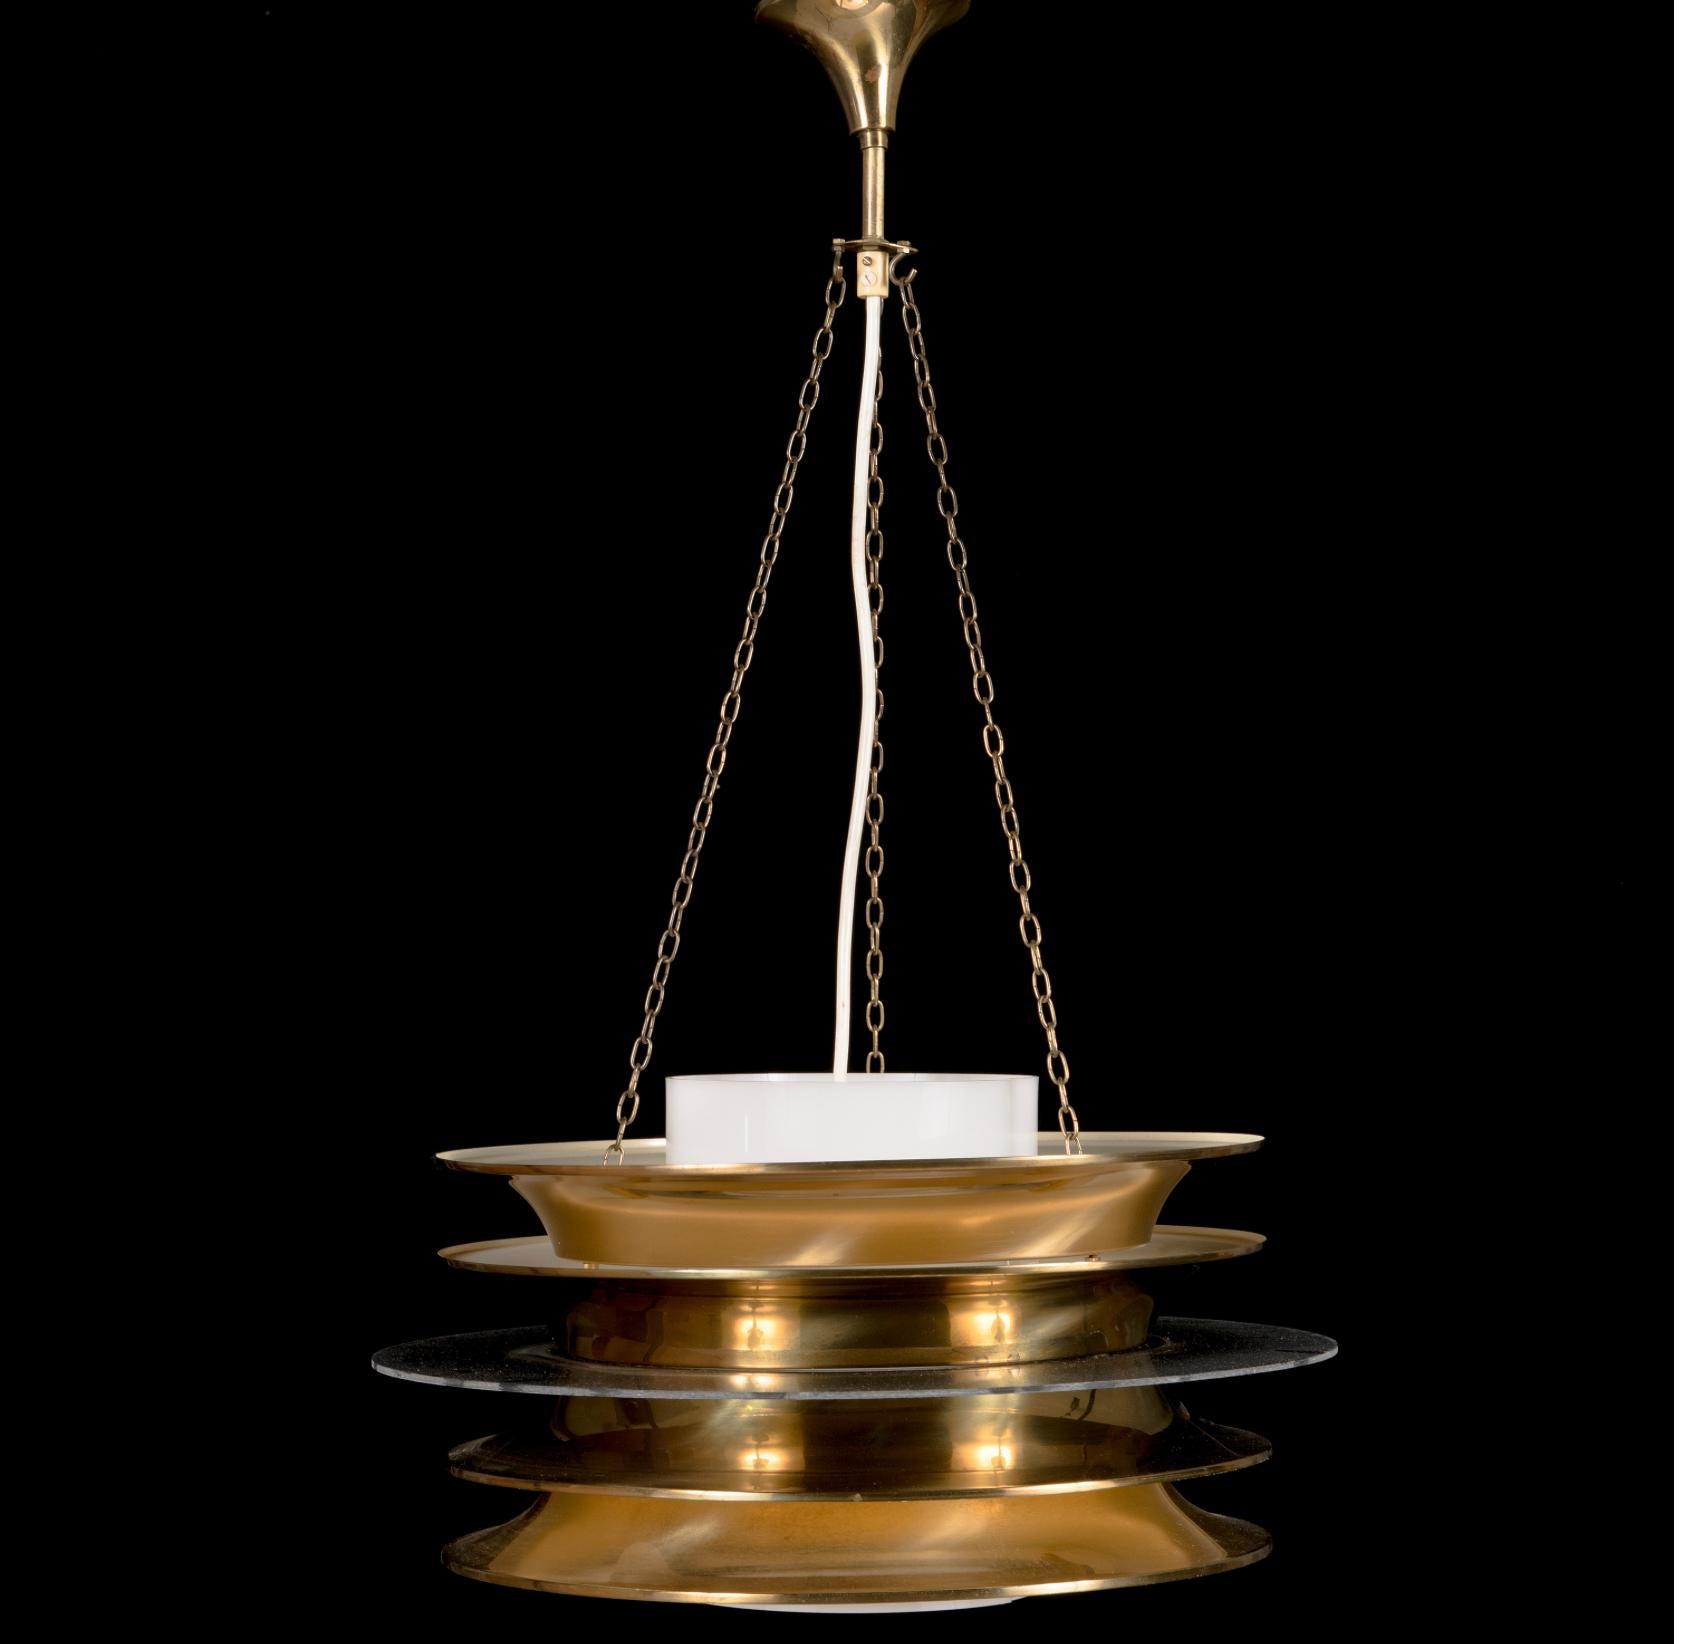 A pendant light designed by Kai Ruokonen ( Kai Finnmark) for Lynx, Finland. 1952.

Brass sheeted lamella lamp, smoke acrylic inner shade. Chain suspension with adjustable height. Label marked. Diameter 45 cm, height of the shade 23 cm.
Rewiring